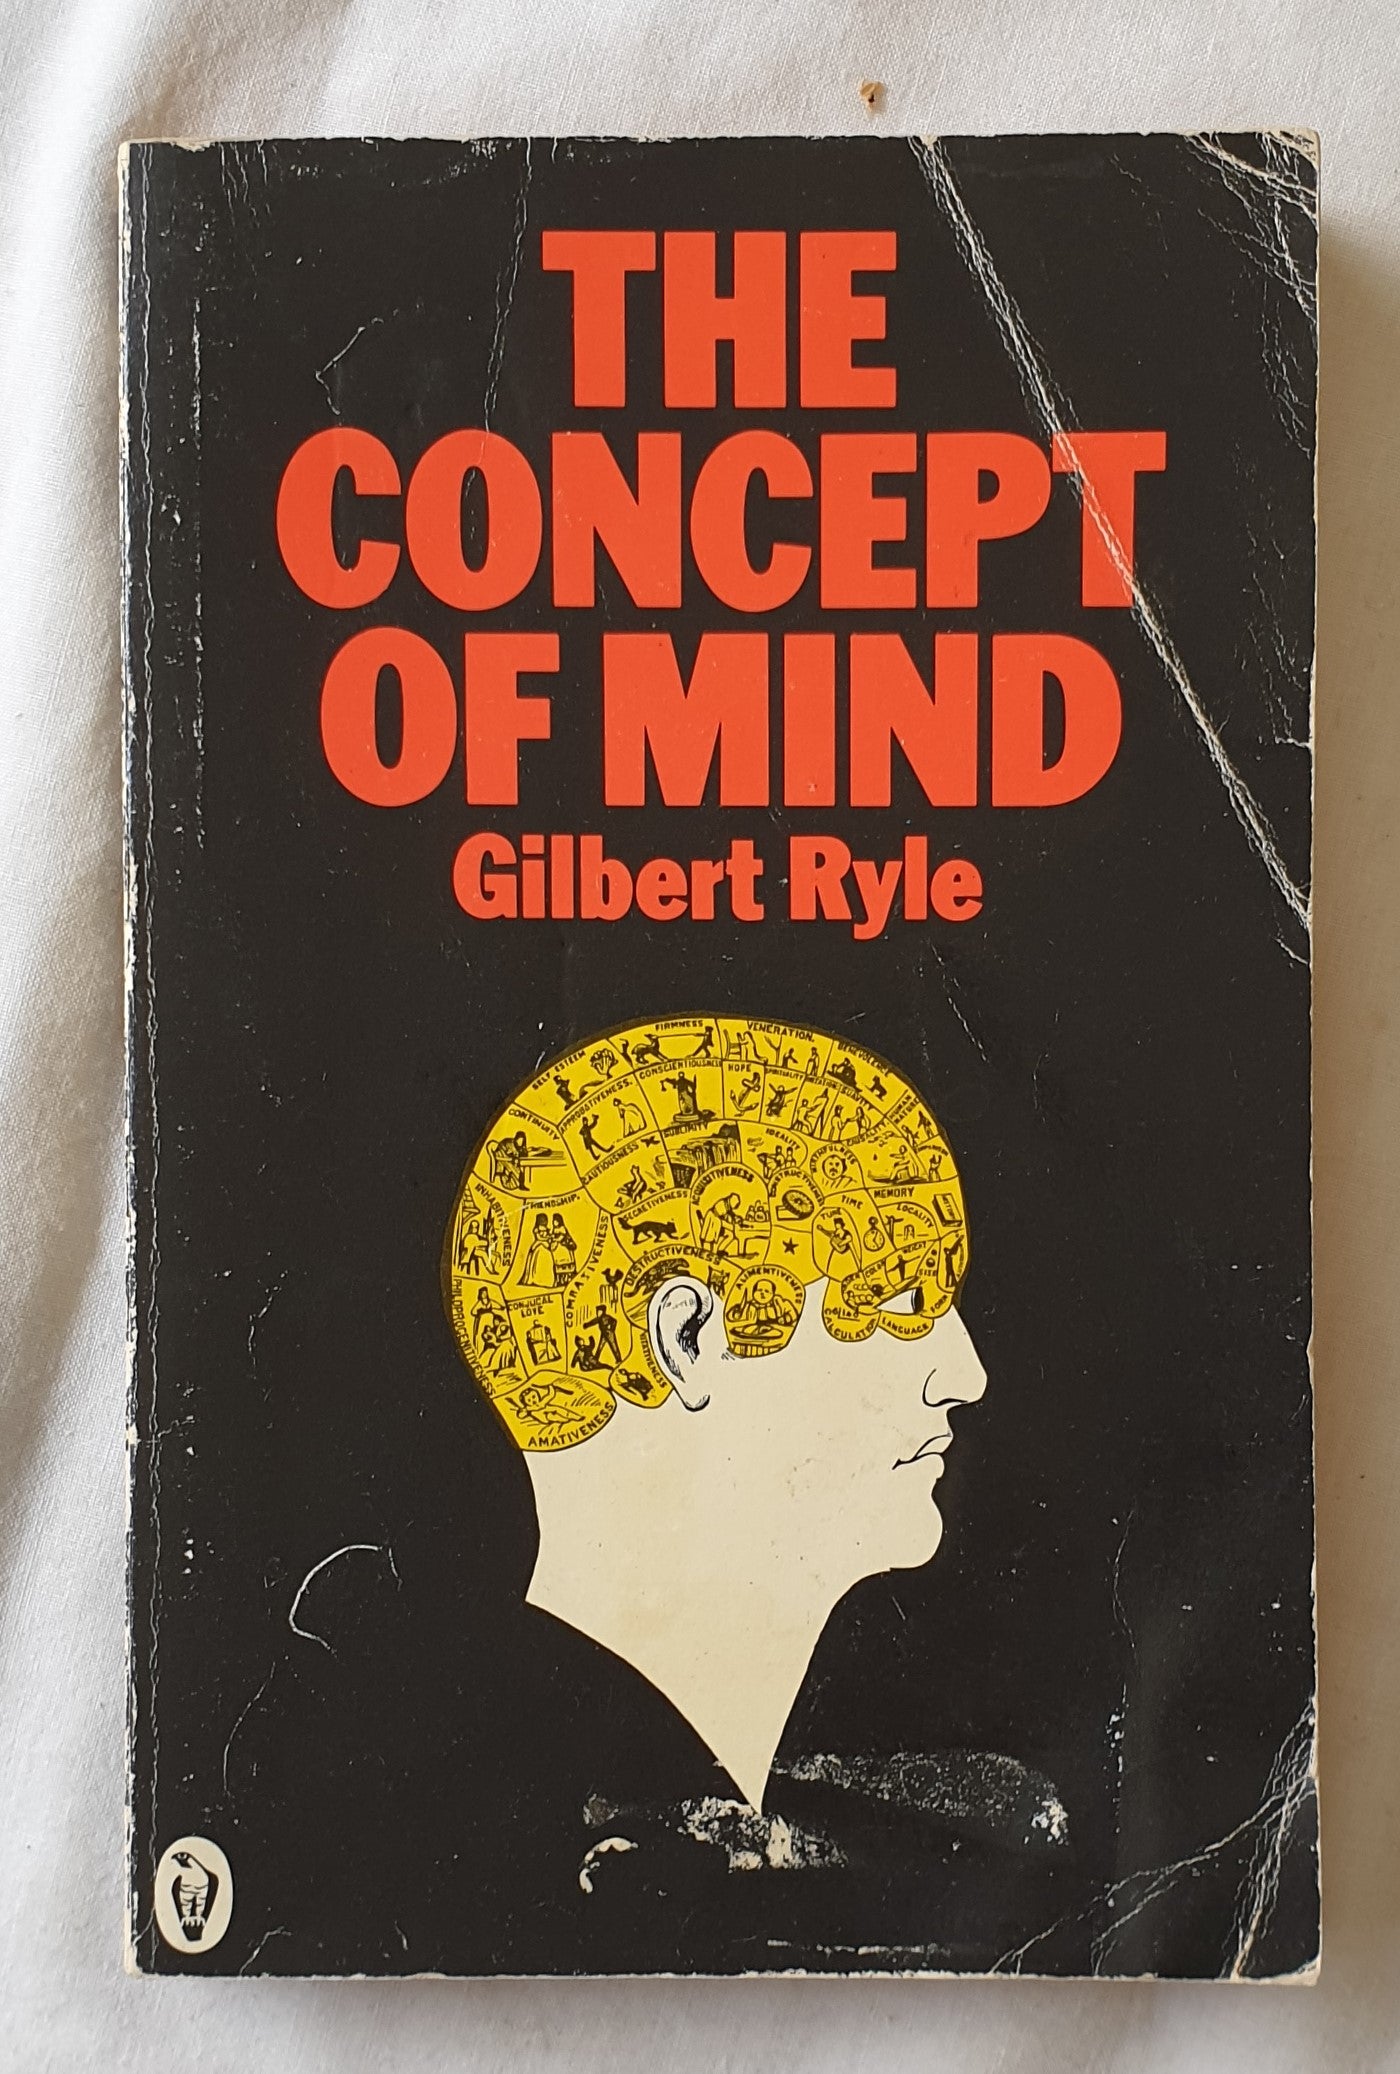 The Concept of Mind by Gilbert Ryle